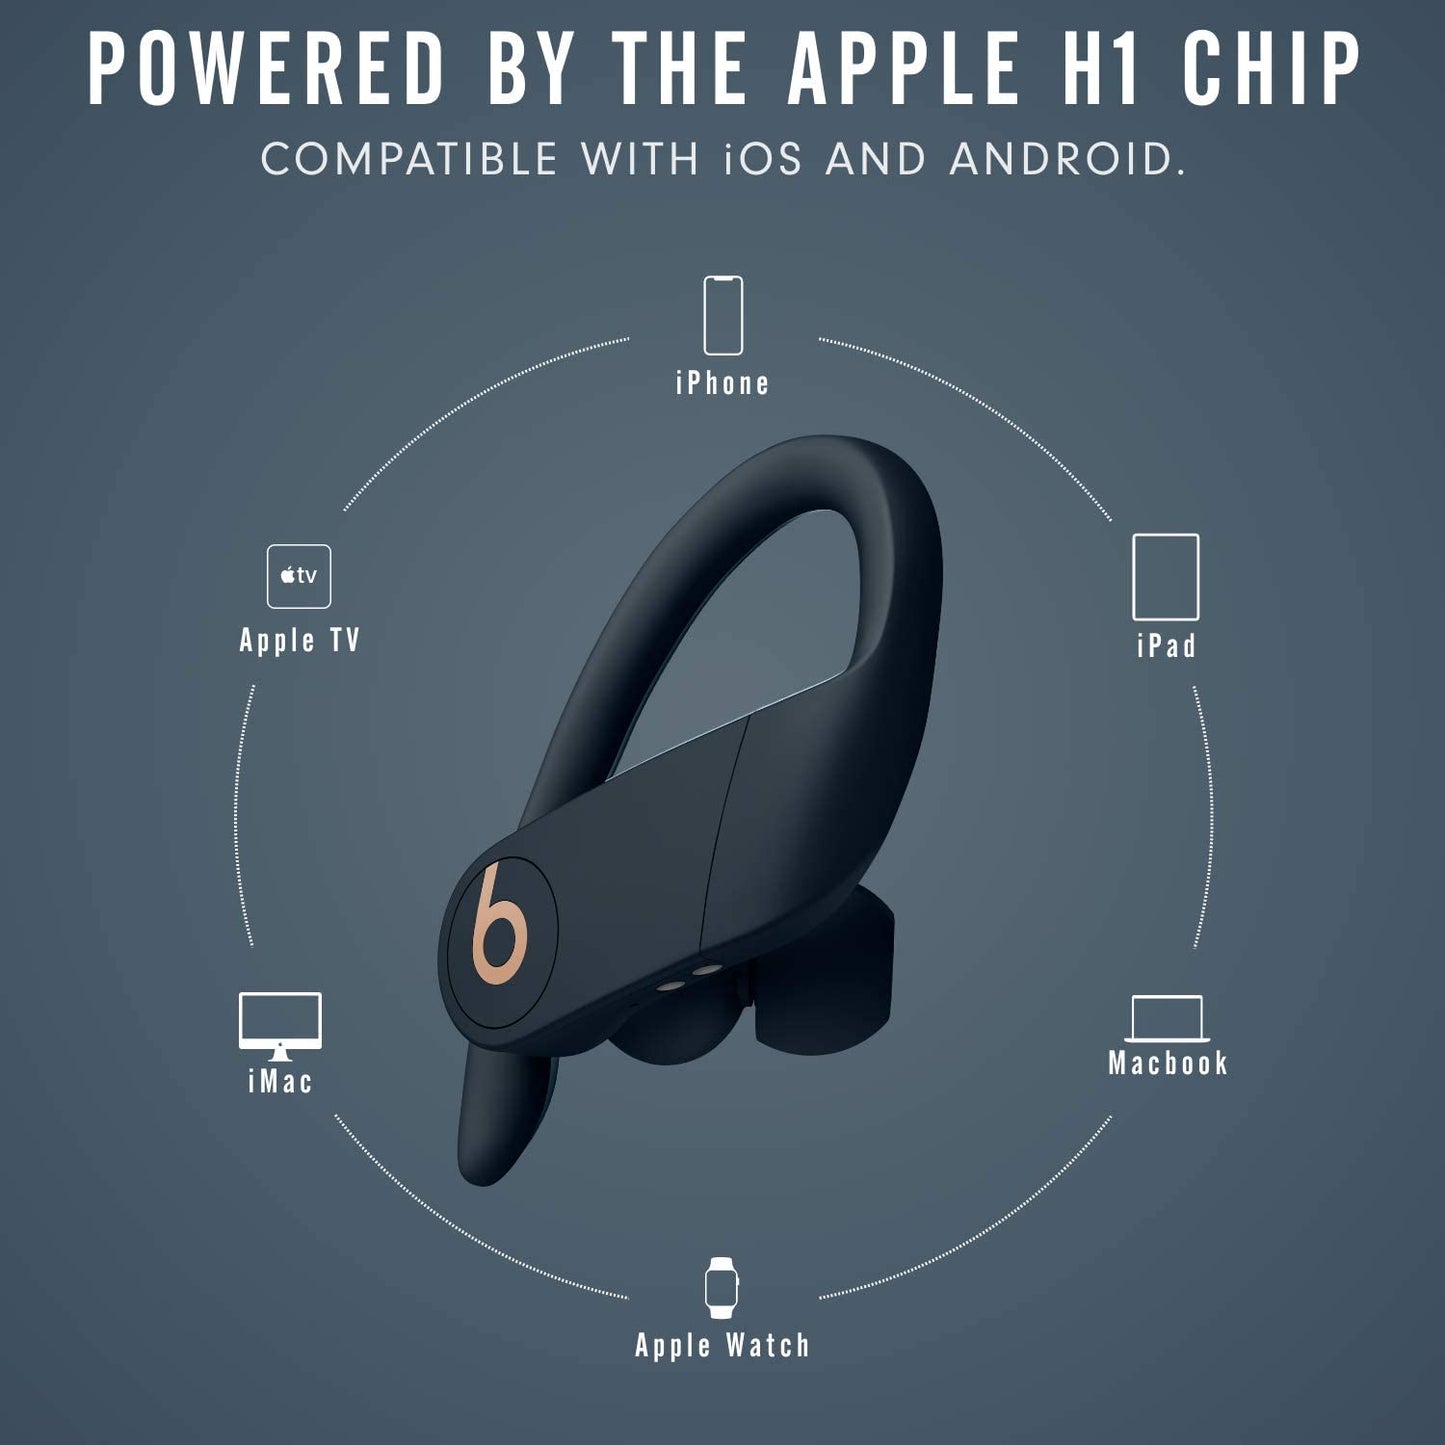 Power Pro Wireless Earbuds - Apple H1 Headphone Chip, Class 1 Bluetooth Headphones, 9 Hours of Listening Time, Sweat Resistant, Built-In Microphone - Navy